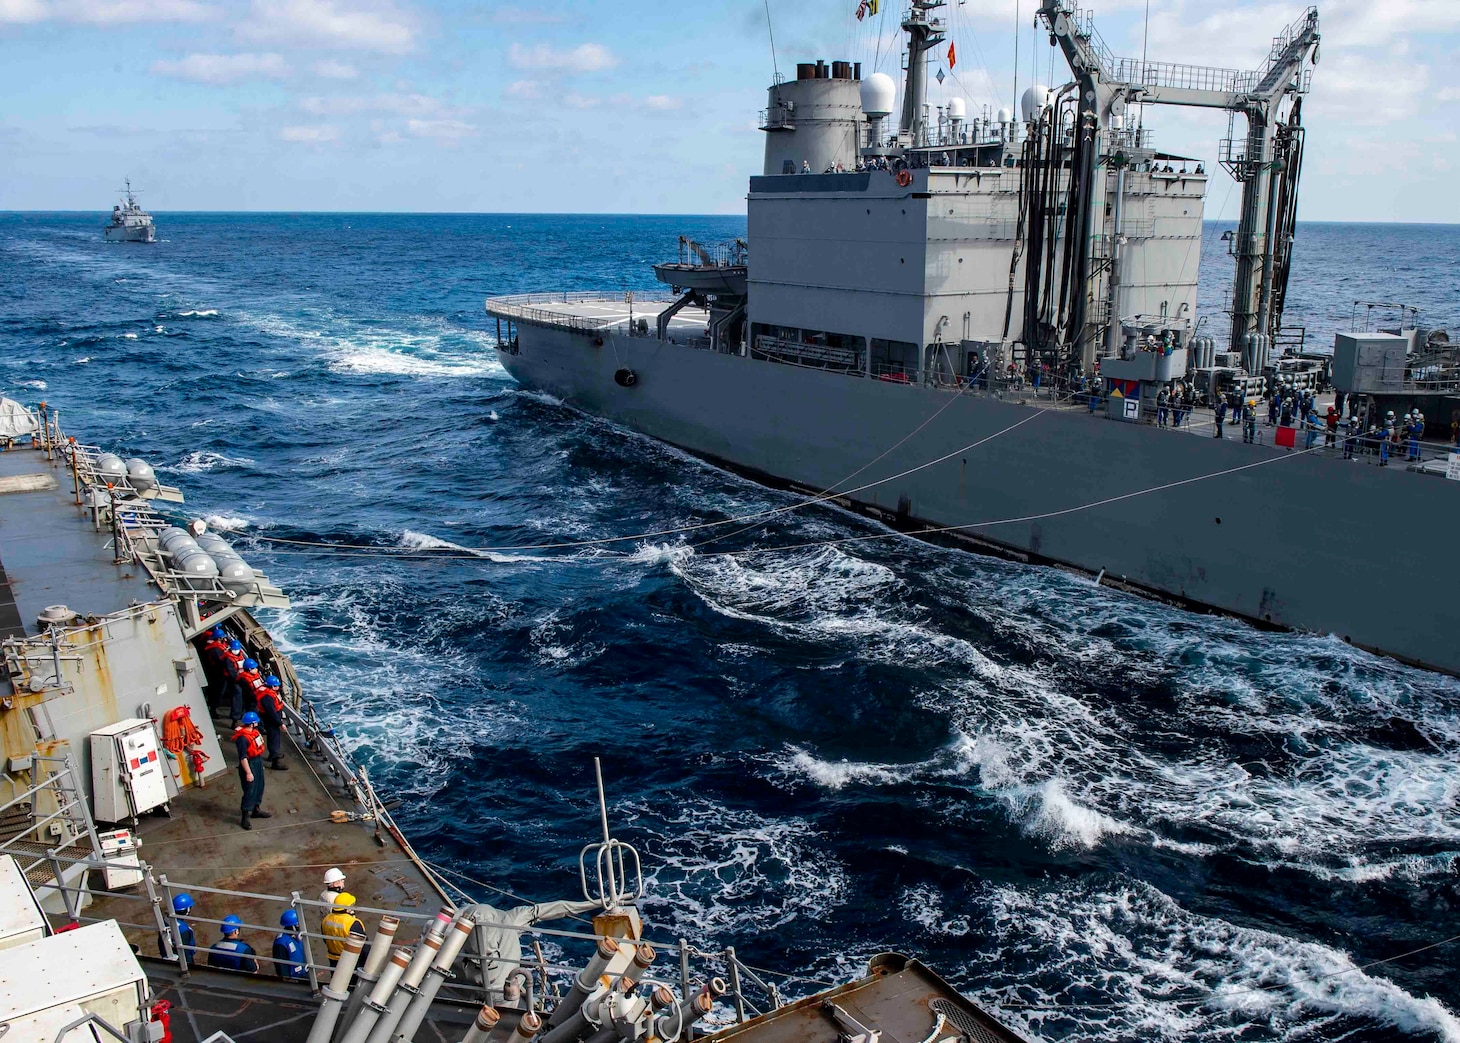 The Arleigh Burke-class guided-missile destroyer USS Curtis Wilbur (DDG 54) conducts a replenishment-at-sea with the Japanese Towada-class replenishment ship JS Hamana (AOE 424) as the Frech Floreal-class light frigate FNS Prairial (F731) prepares to come alongside. Curtis Wilbur is assigned to Destroyer Squadron (DESRON) 15, the Navy's largest forward-deployed DESRON and the U.S. 7th Fleet's principal surface force.